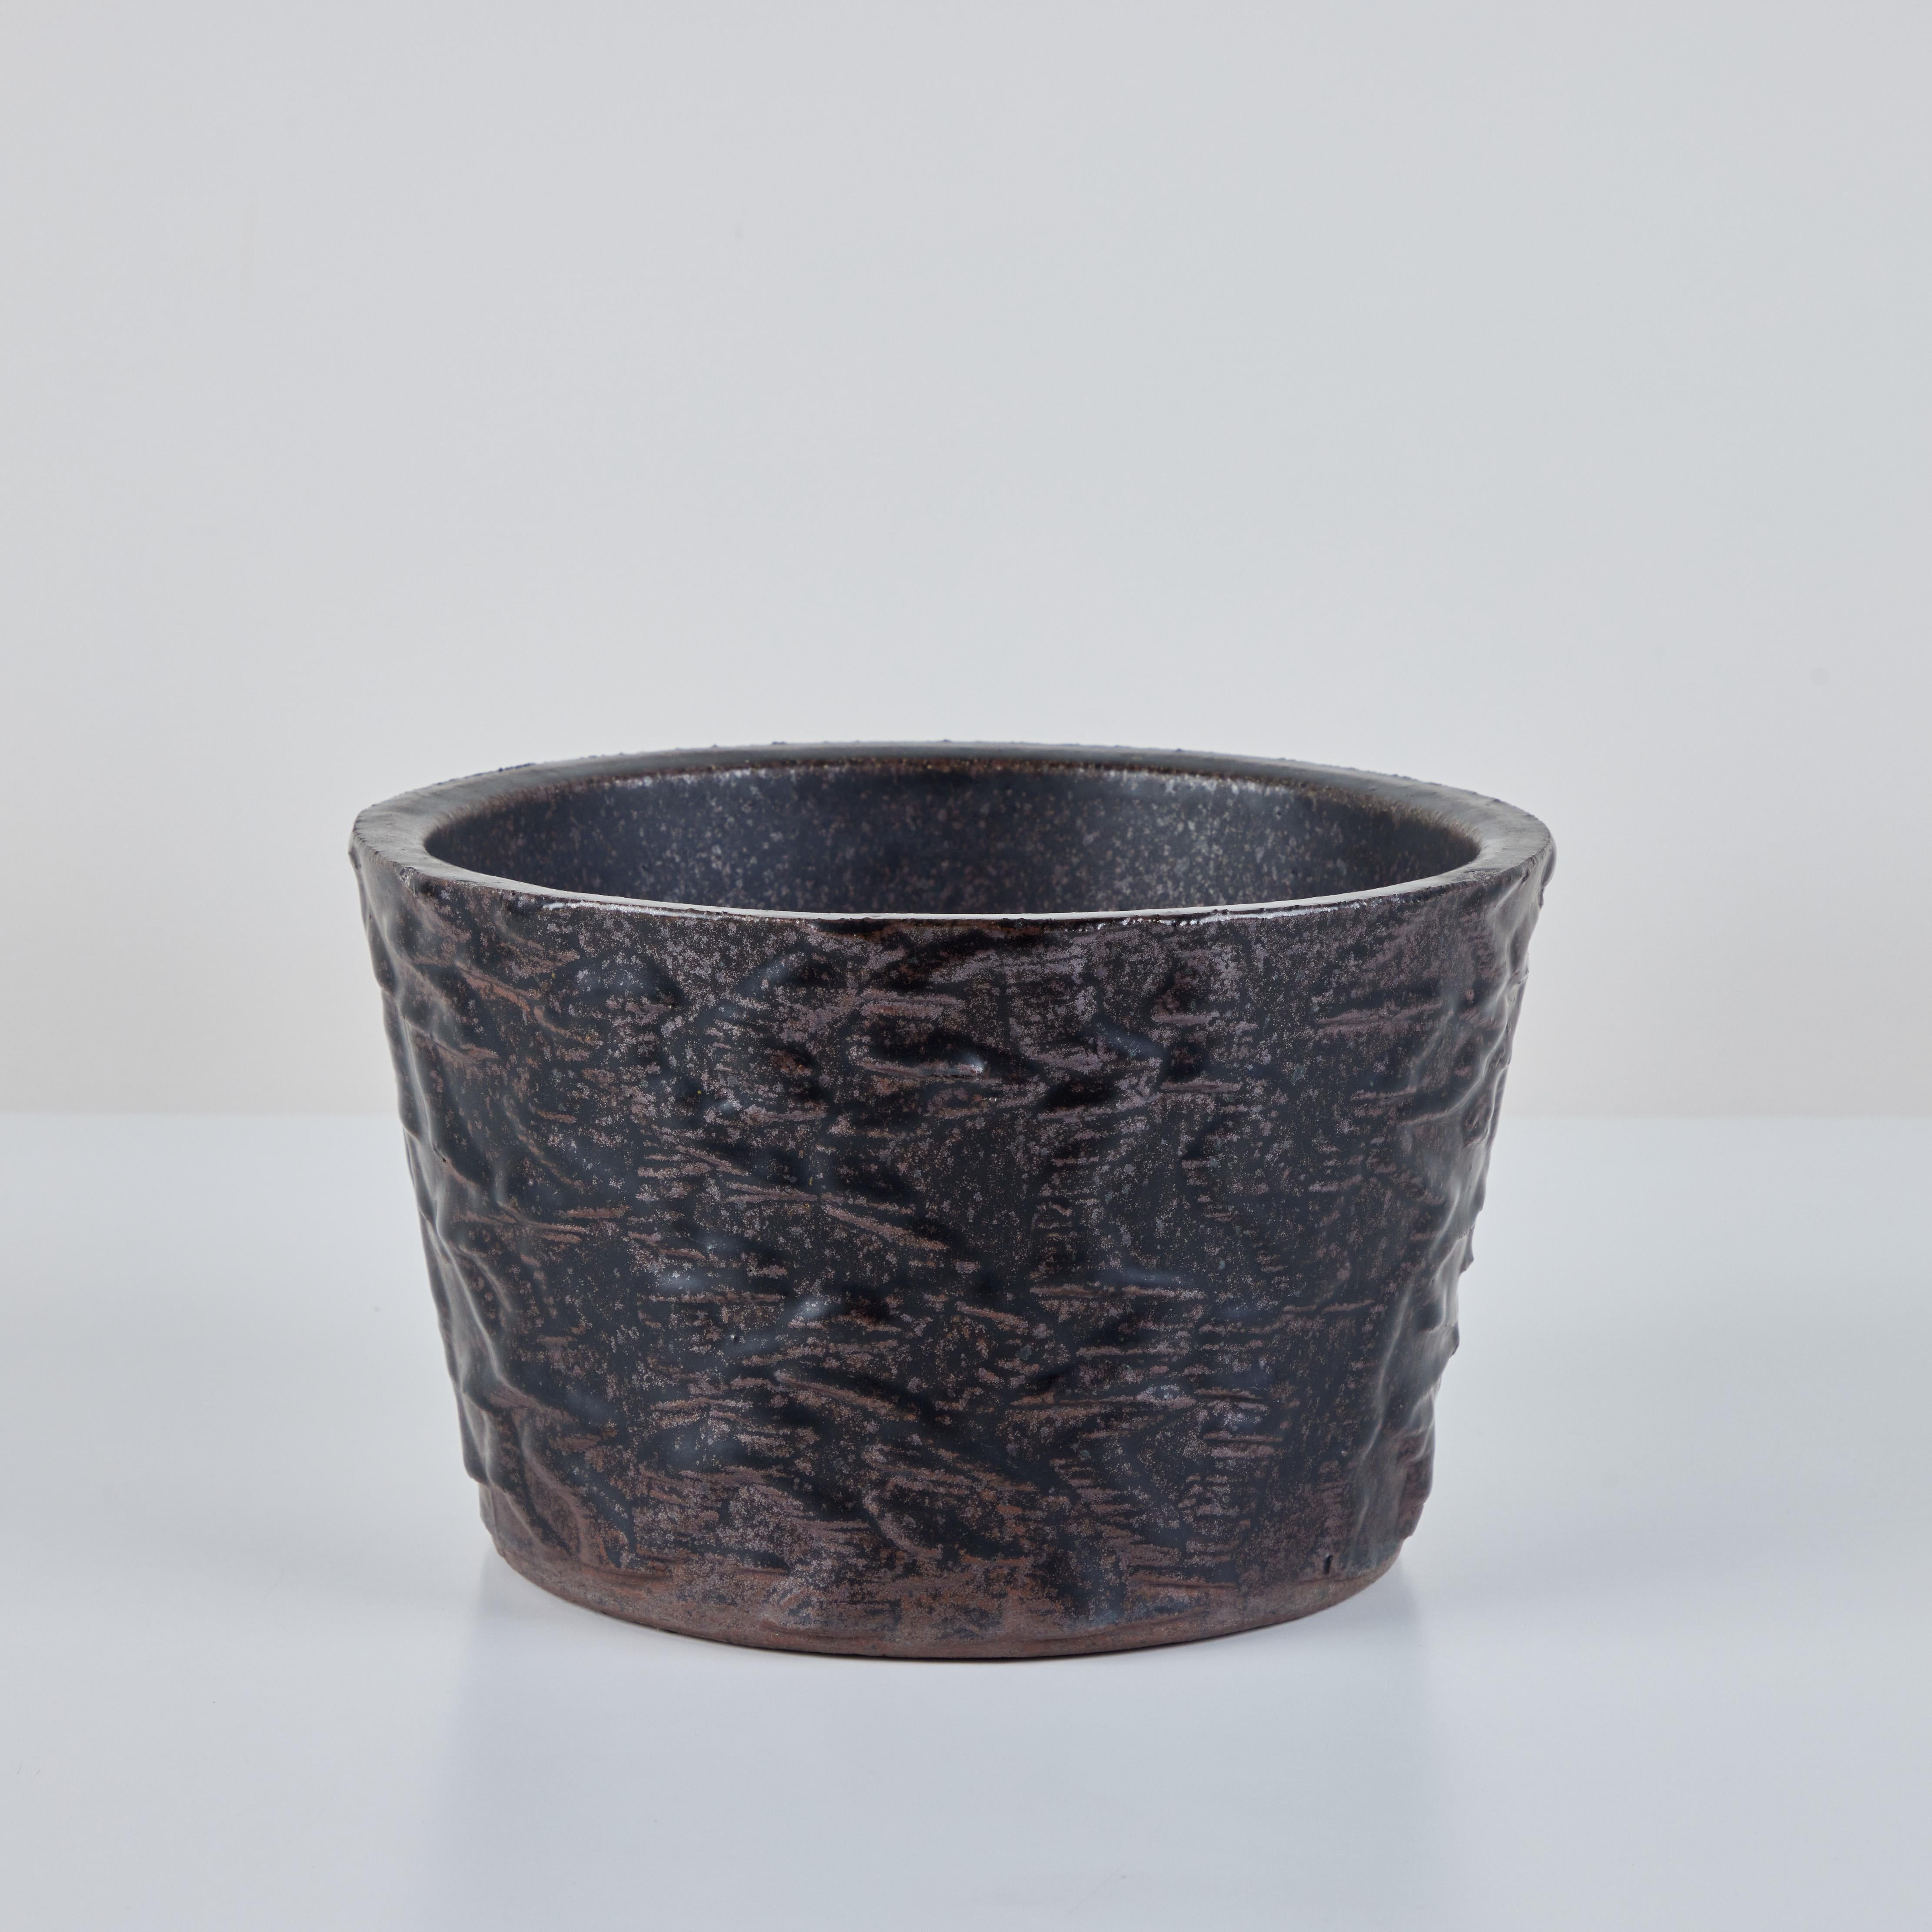 Malcom Leland Planter for Architectural Pottery, c.1960s, USA. This stoneware planter has a brown and black glazed exterior with texture as well as a glazed interior. The round planter tappers inwards slightly towards the bottom. 

Dimensions
9.75